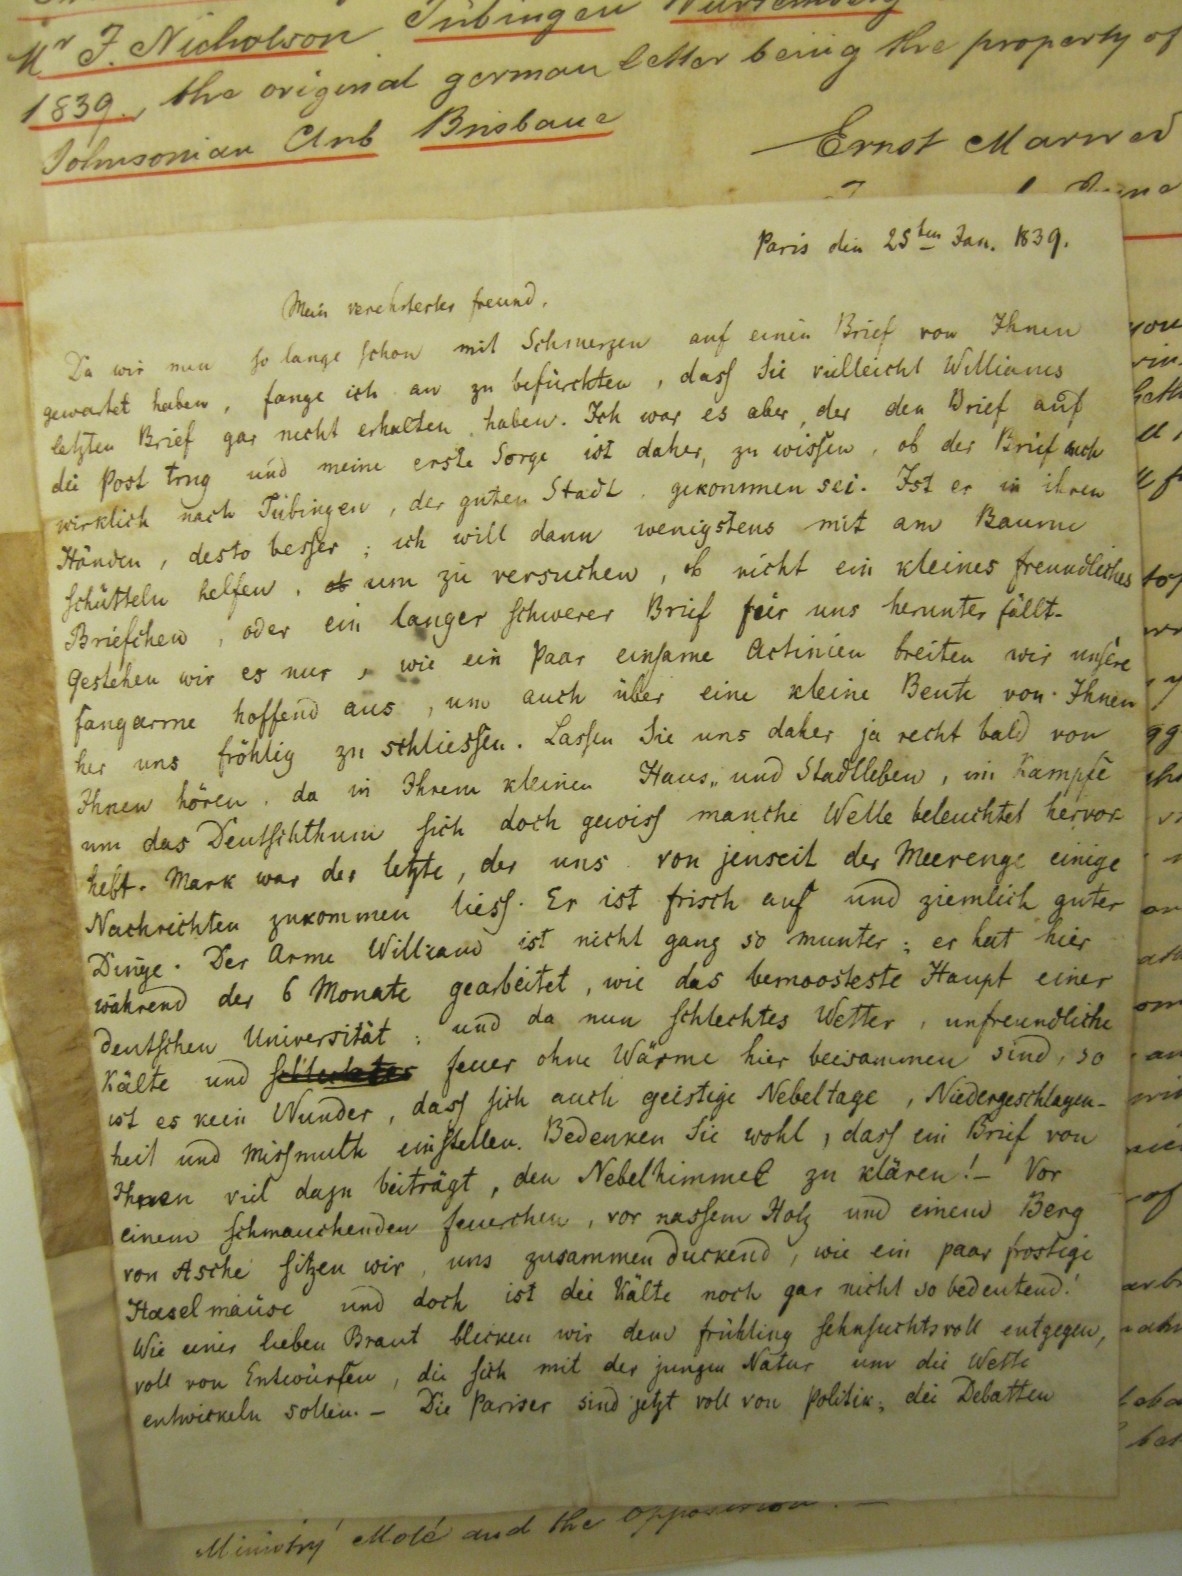 photo of a handwritten letter dated 1839 